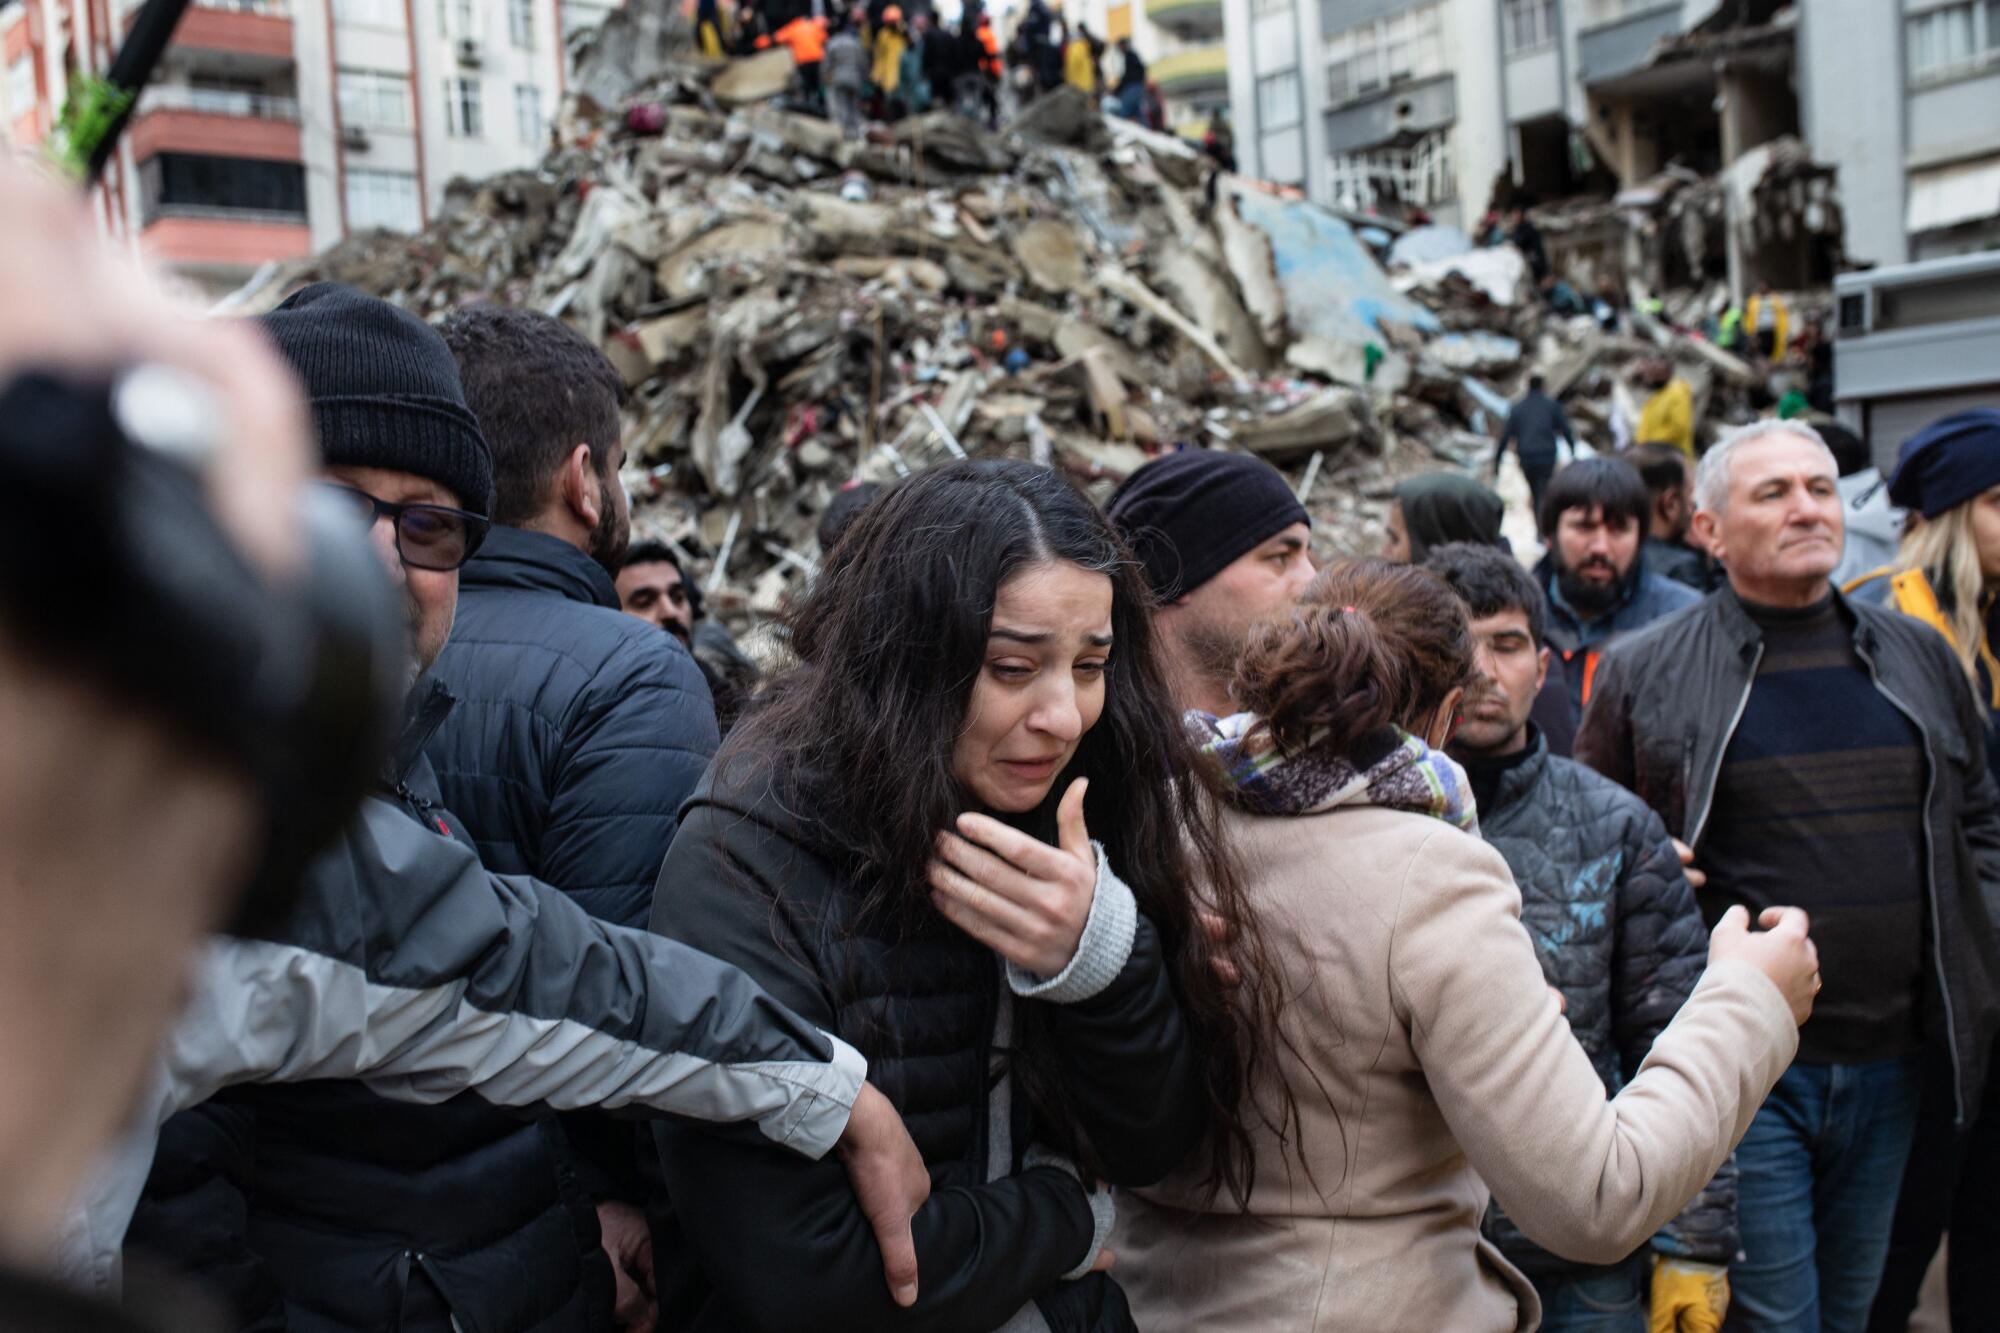 A woman raises her hand to her face, crying, as rescuers search for survivors through the rubble of a building.